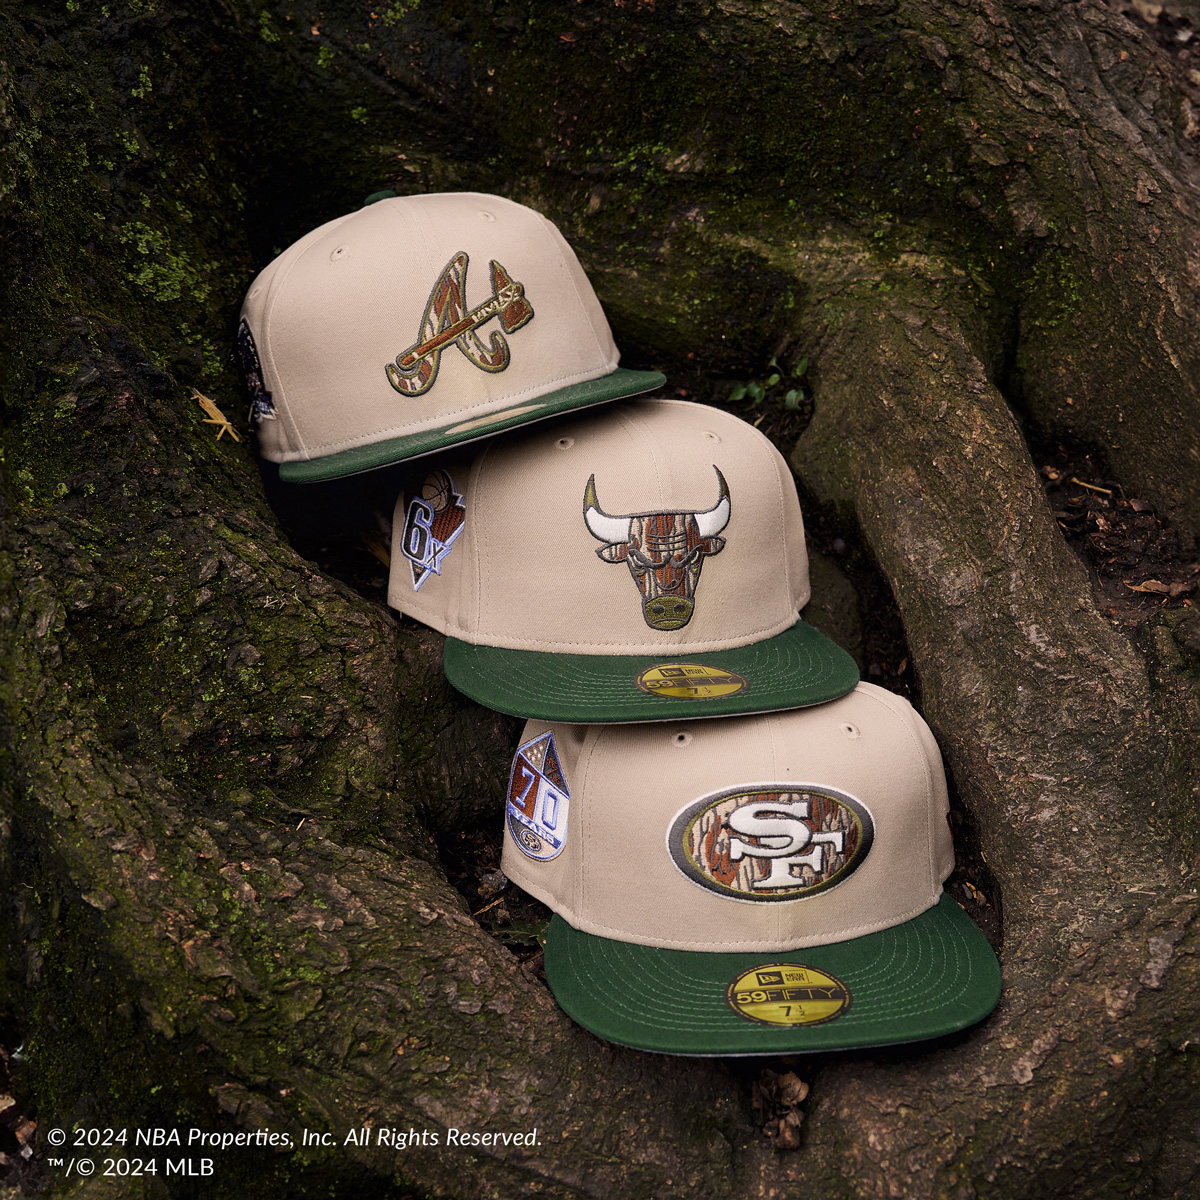 From the mountains to the sea, there’s only one team when it comes to our planet. Celebrate Earth Day with organic cotton 59FIFTY Fitted Caps, available exclusively at New Era Cap newer.ac/EarthDay2024